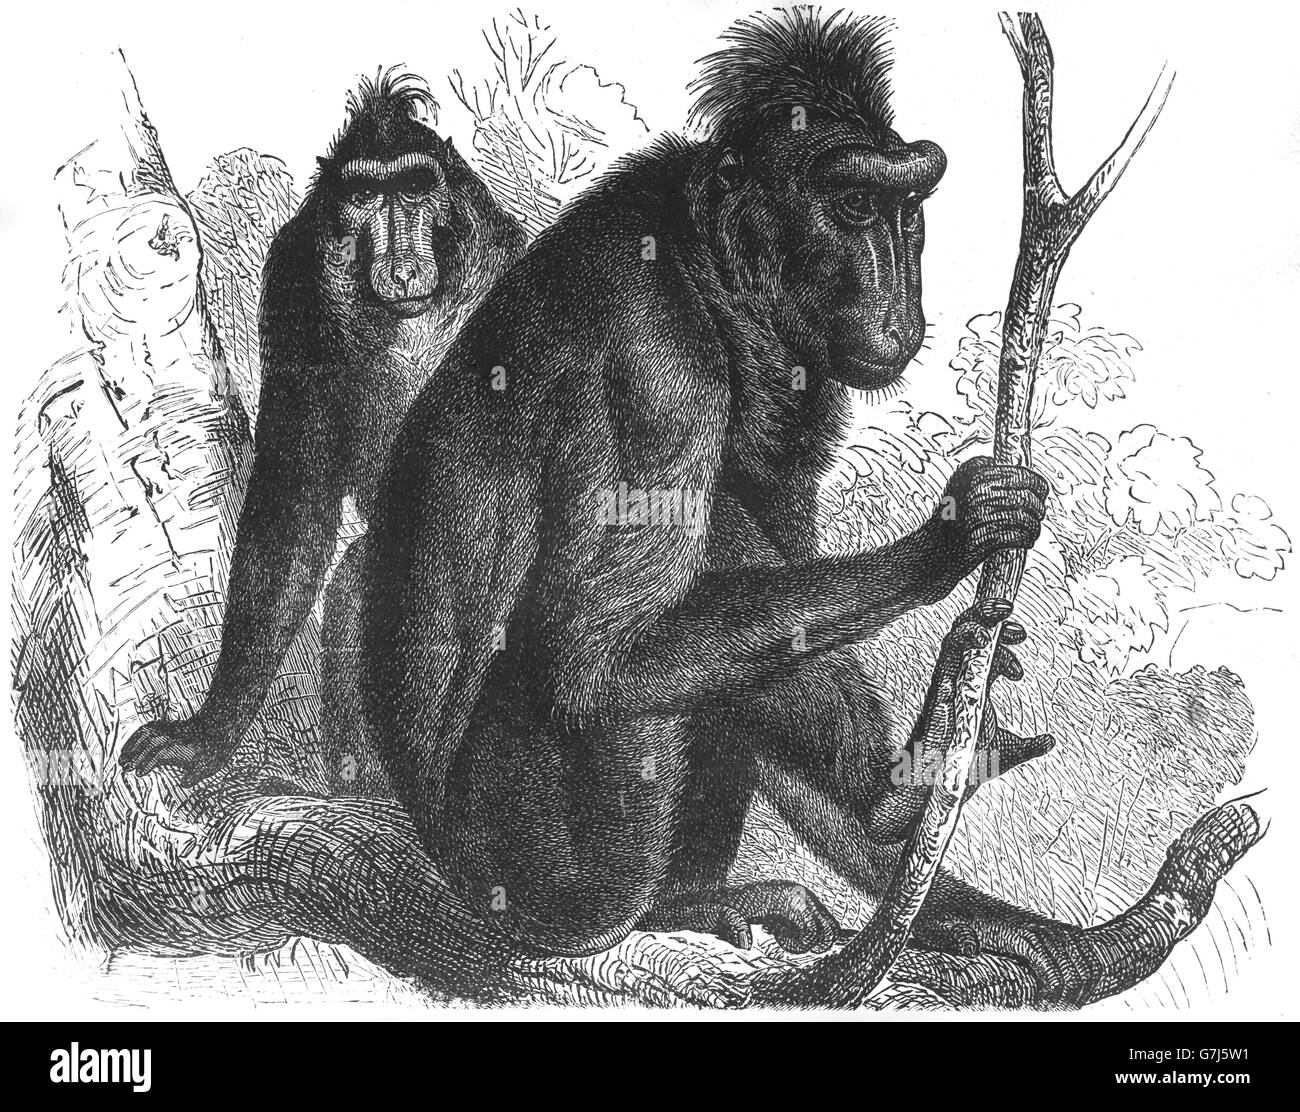 Celebes crested macaque, Macaca nigra, Sulawesi crested macaque, black ape, Old World monkey, Cercopithecidae, illustration from Stock Photo